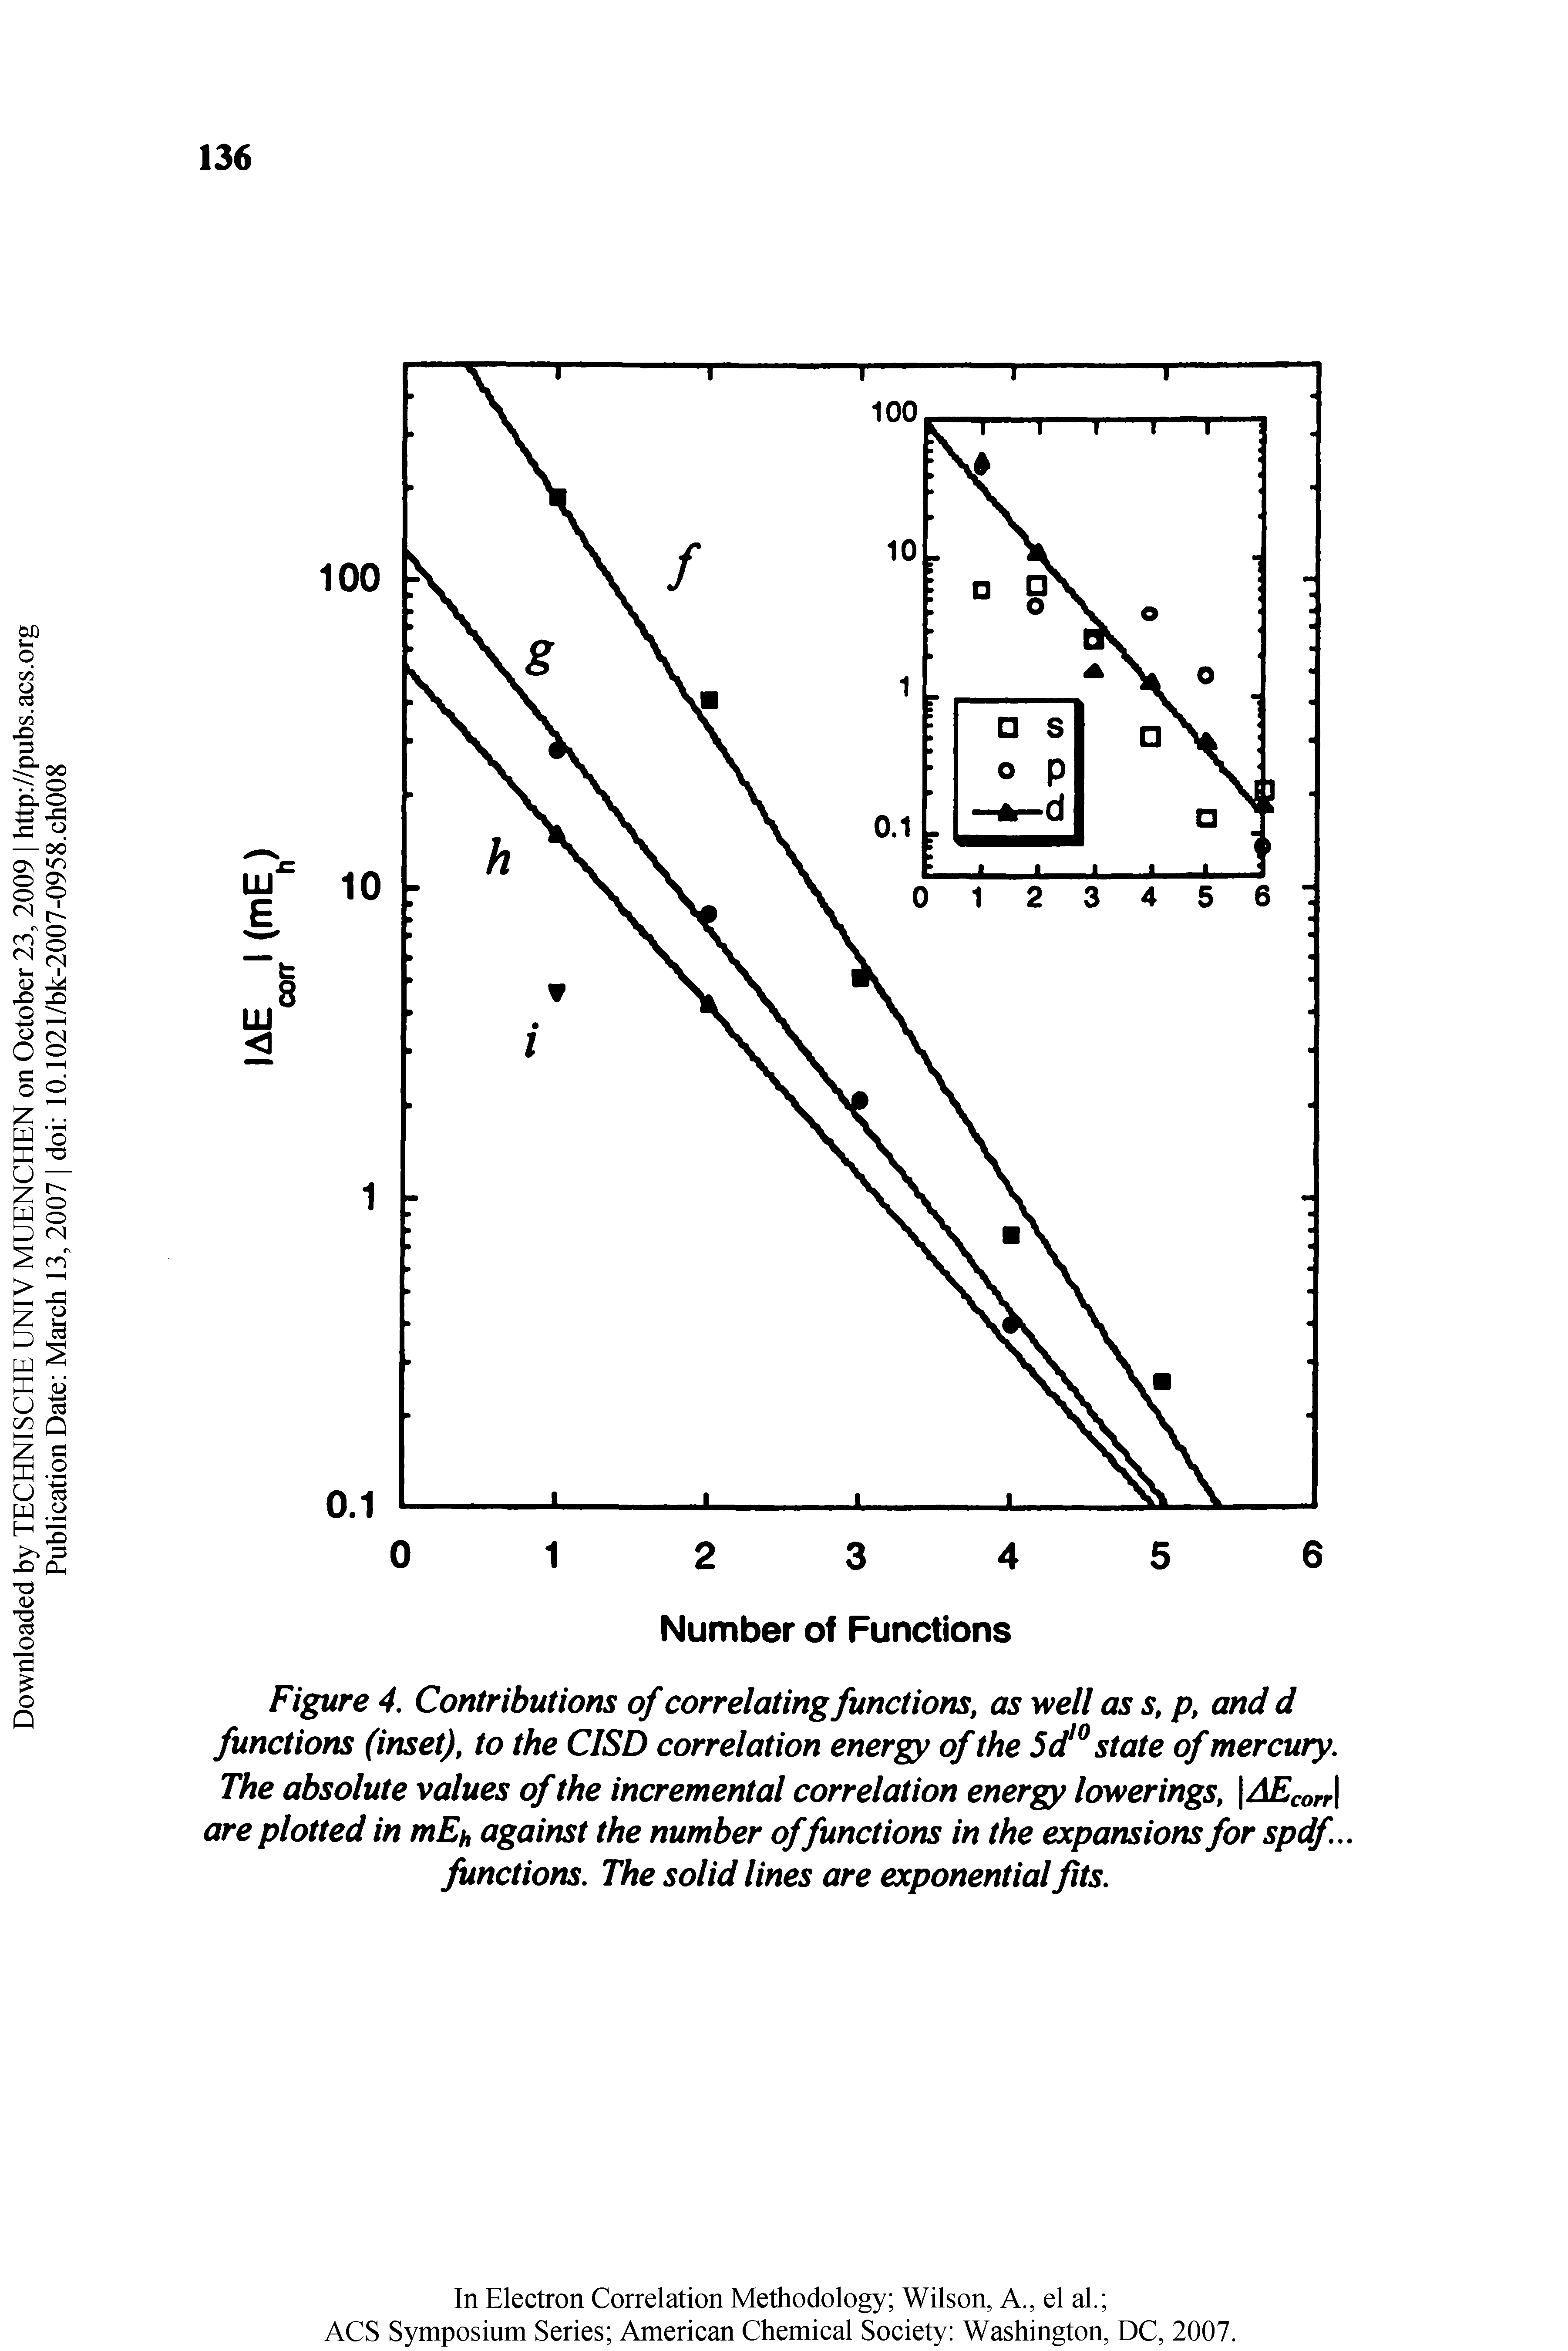 Figure 4. Contributions of correlating functions, as well as s, p, and d functions (inset), to the CISD correlation energy of the 5 d state of mercury. The absolute values of the incremental correlation energy lowerings, AEcon are plotted in mEh against the number offunctions in the expansions for spdf... functions. The solid lines are exponential fits.